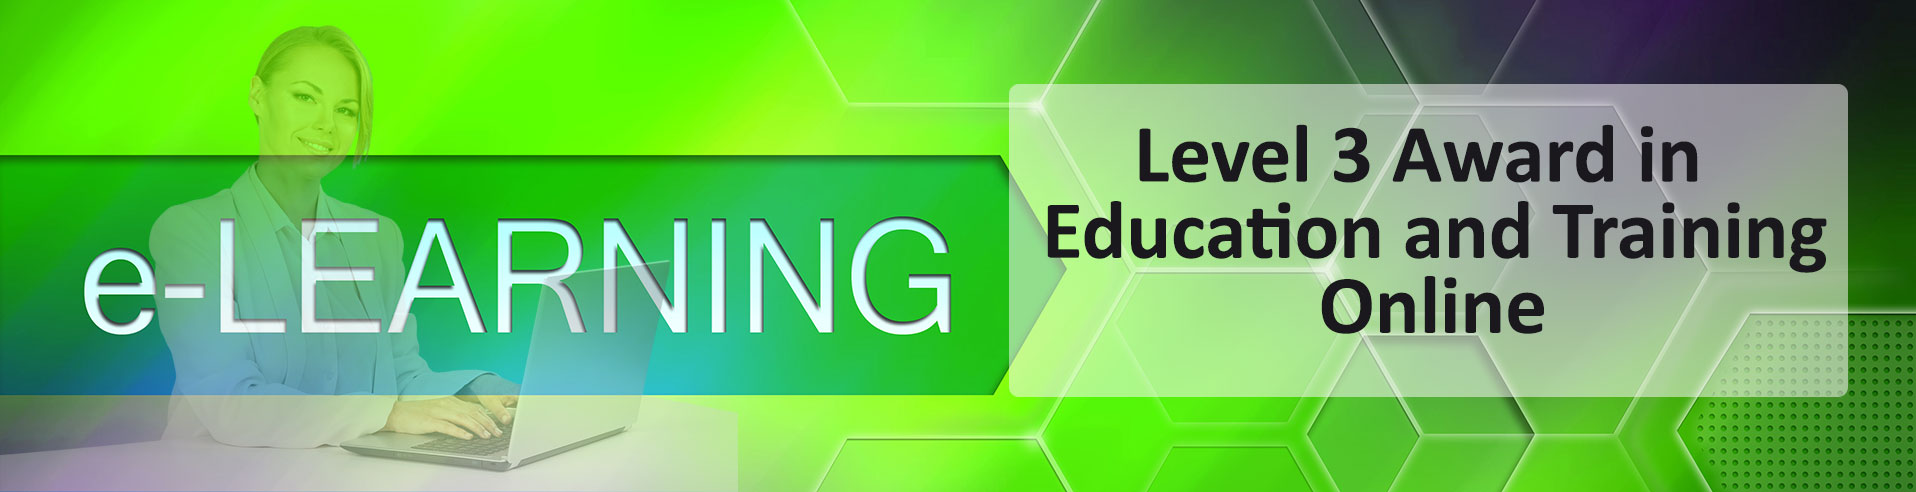 online level 3 award in education and training